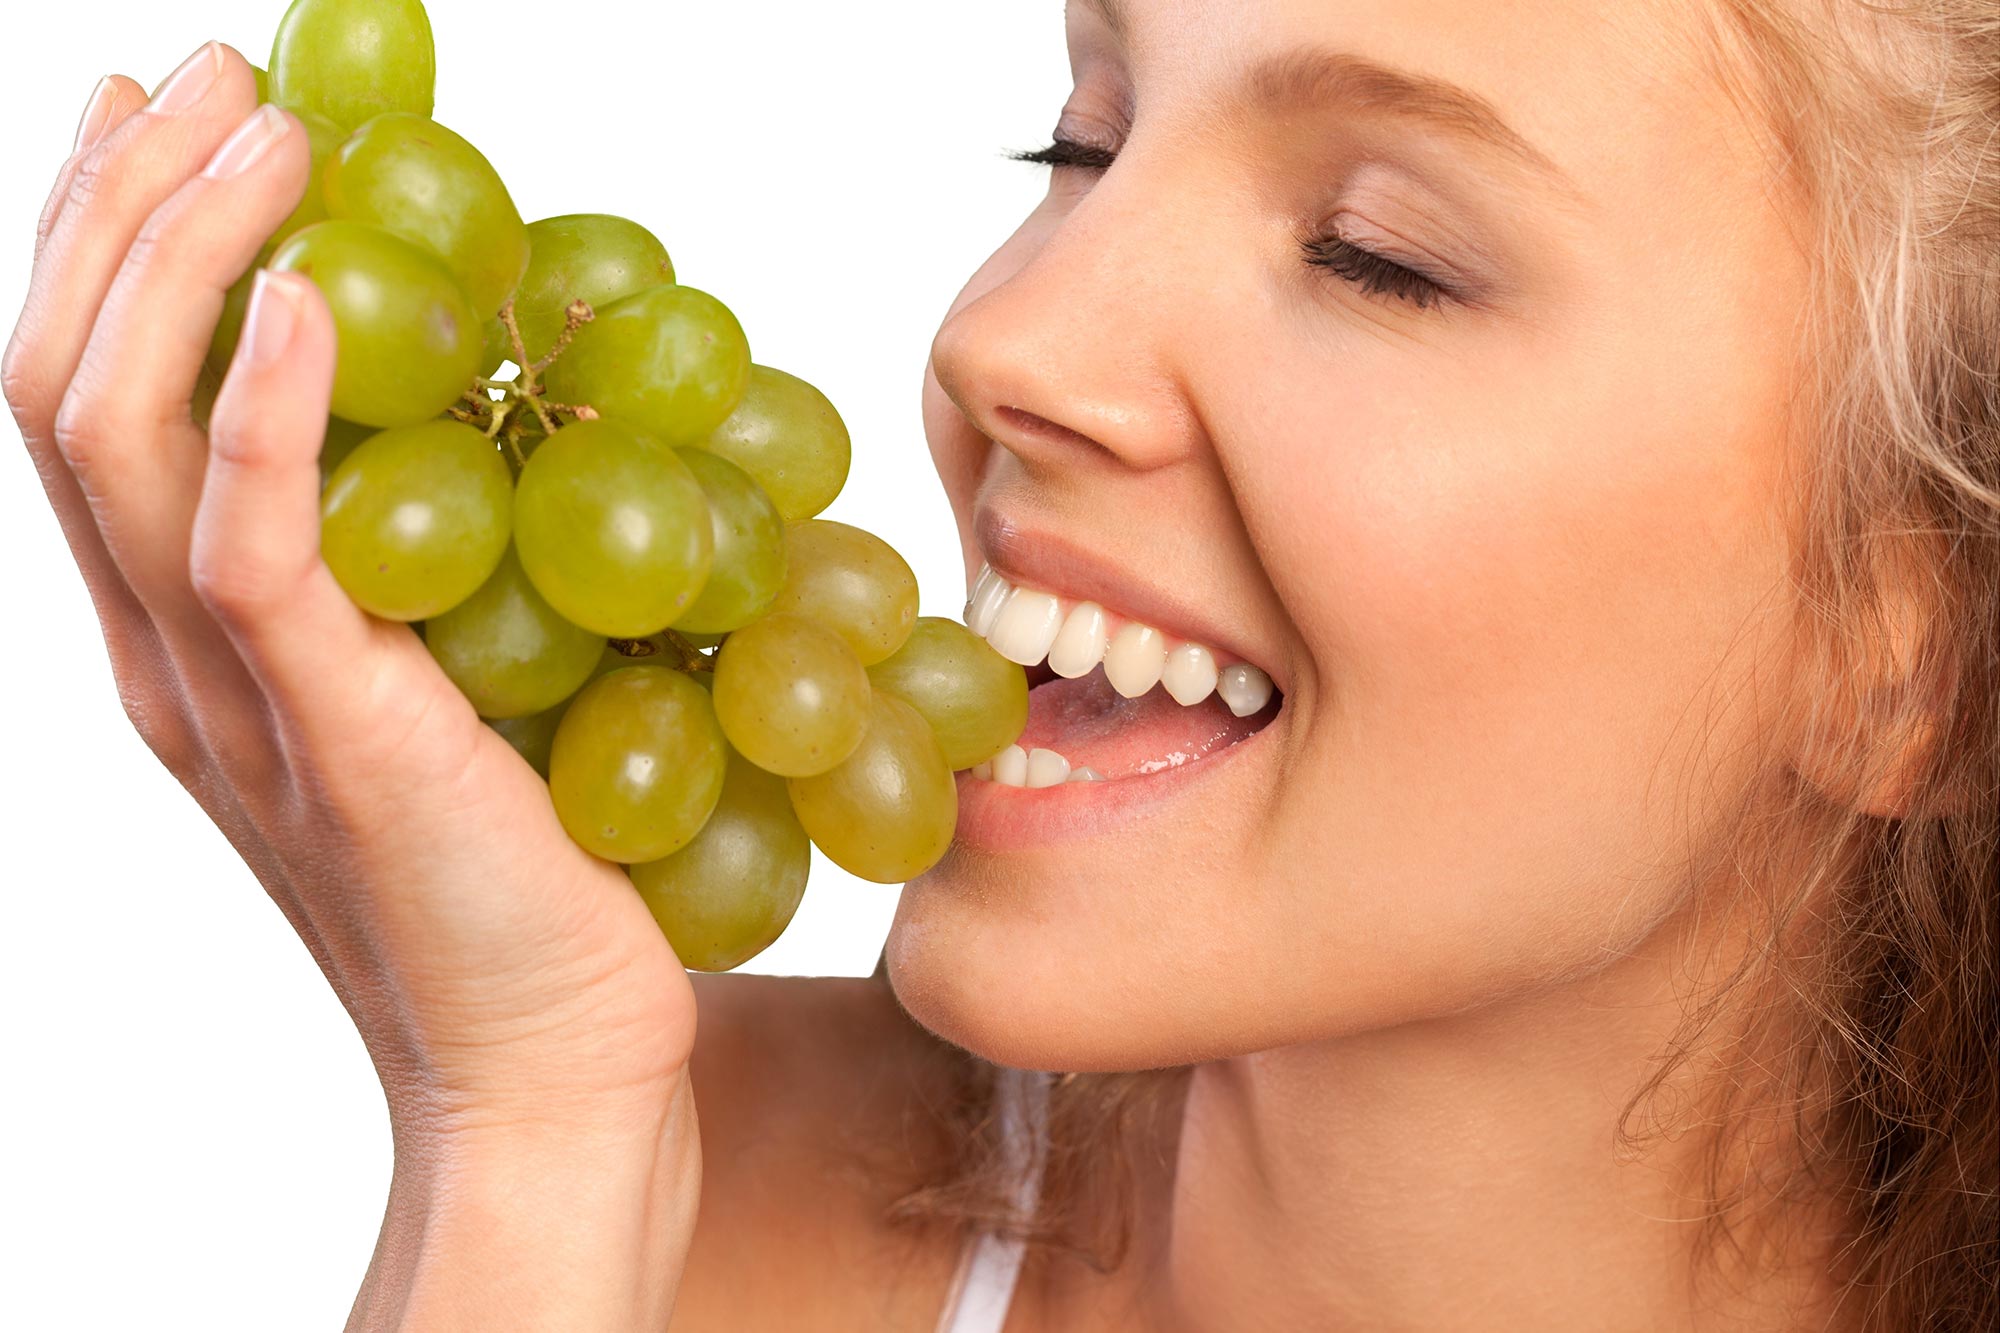 Analysis Exhibits “Exceptional” Impacts of Grape Consumption on Well being and Lifespans